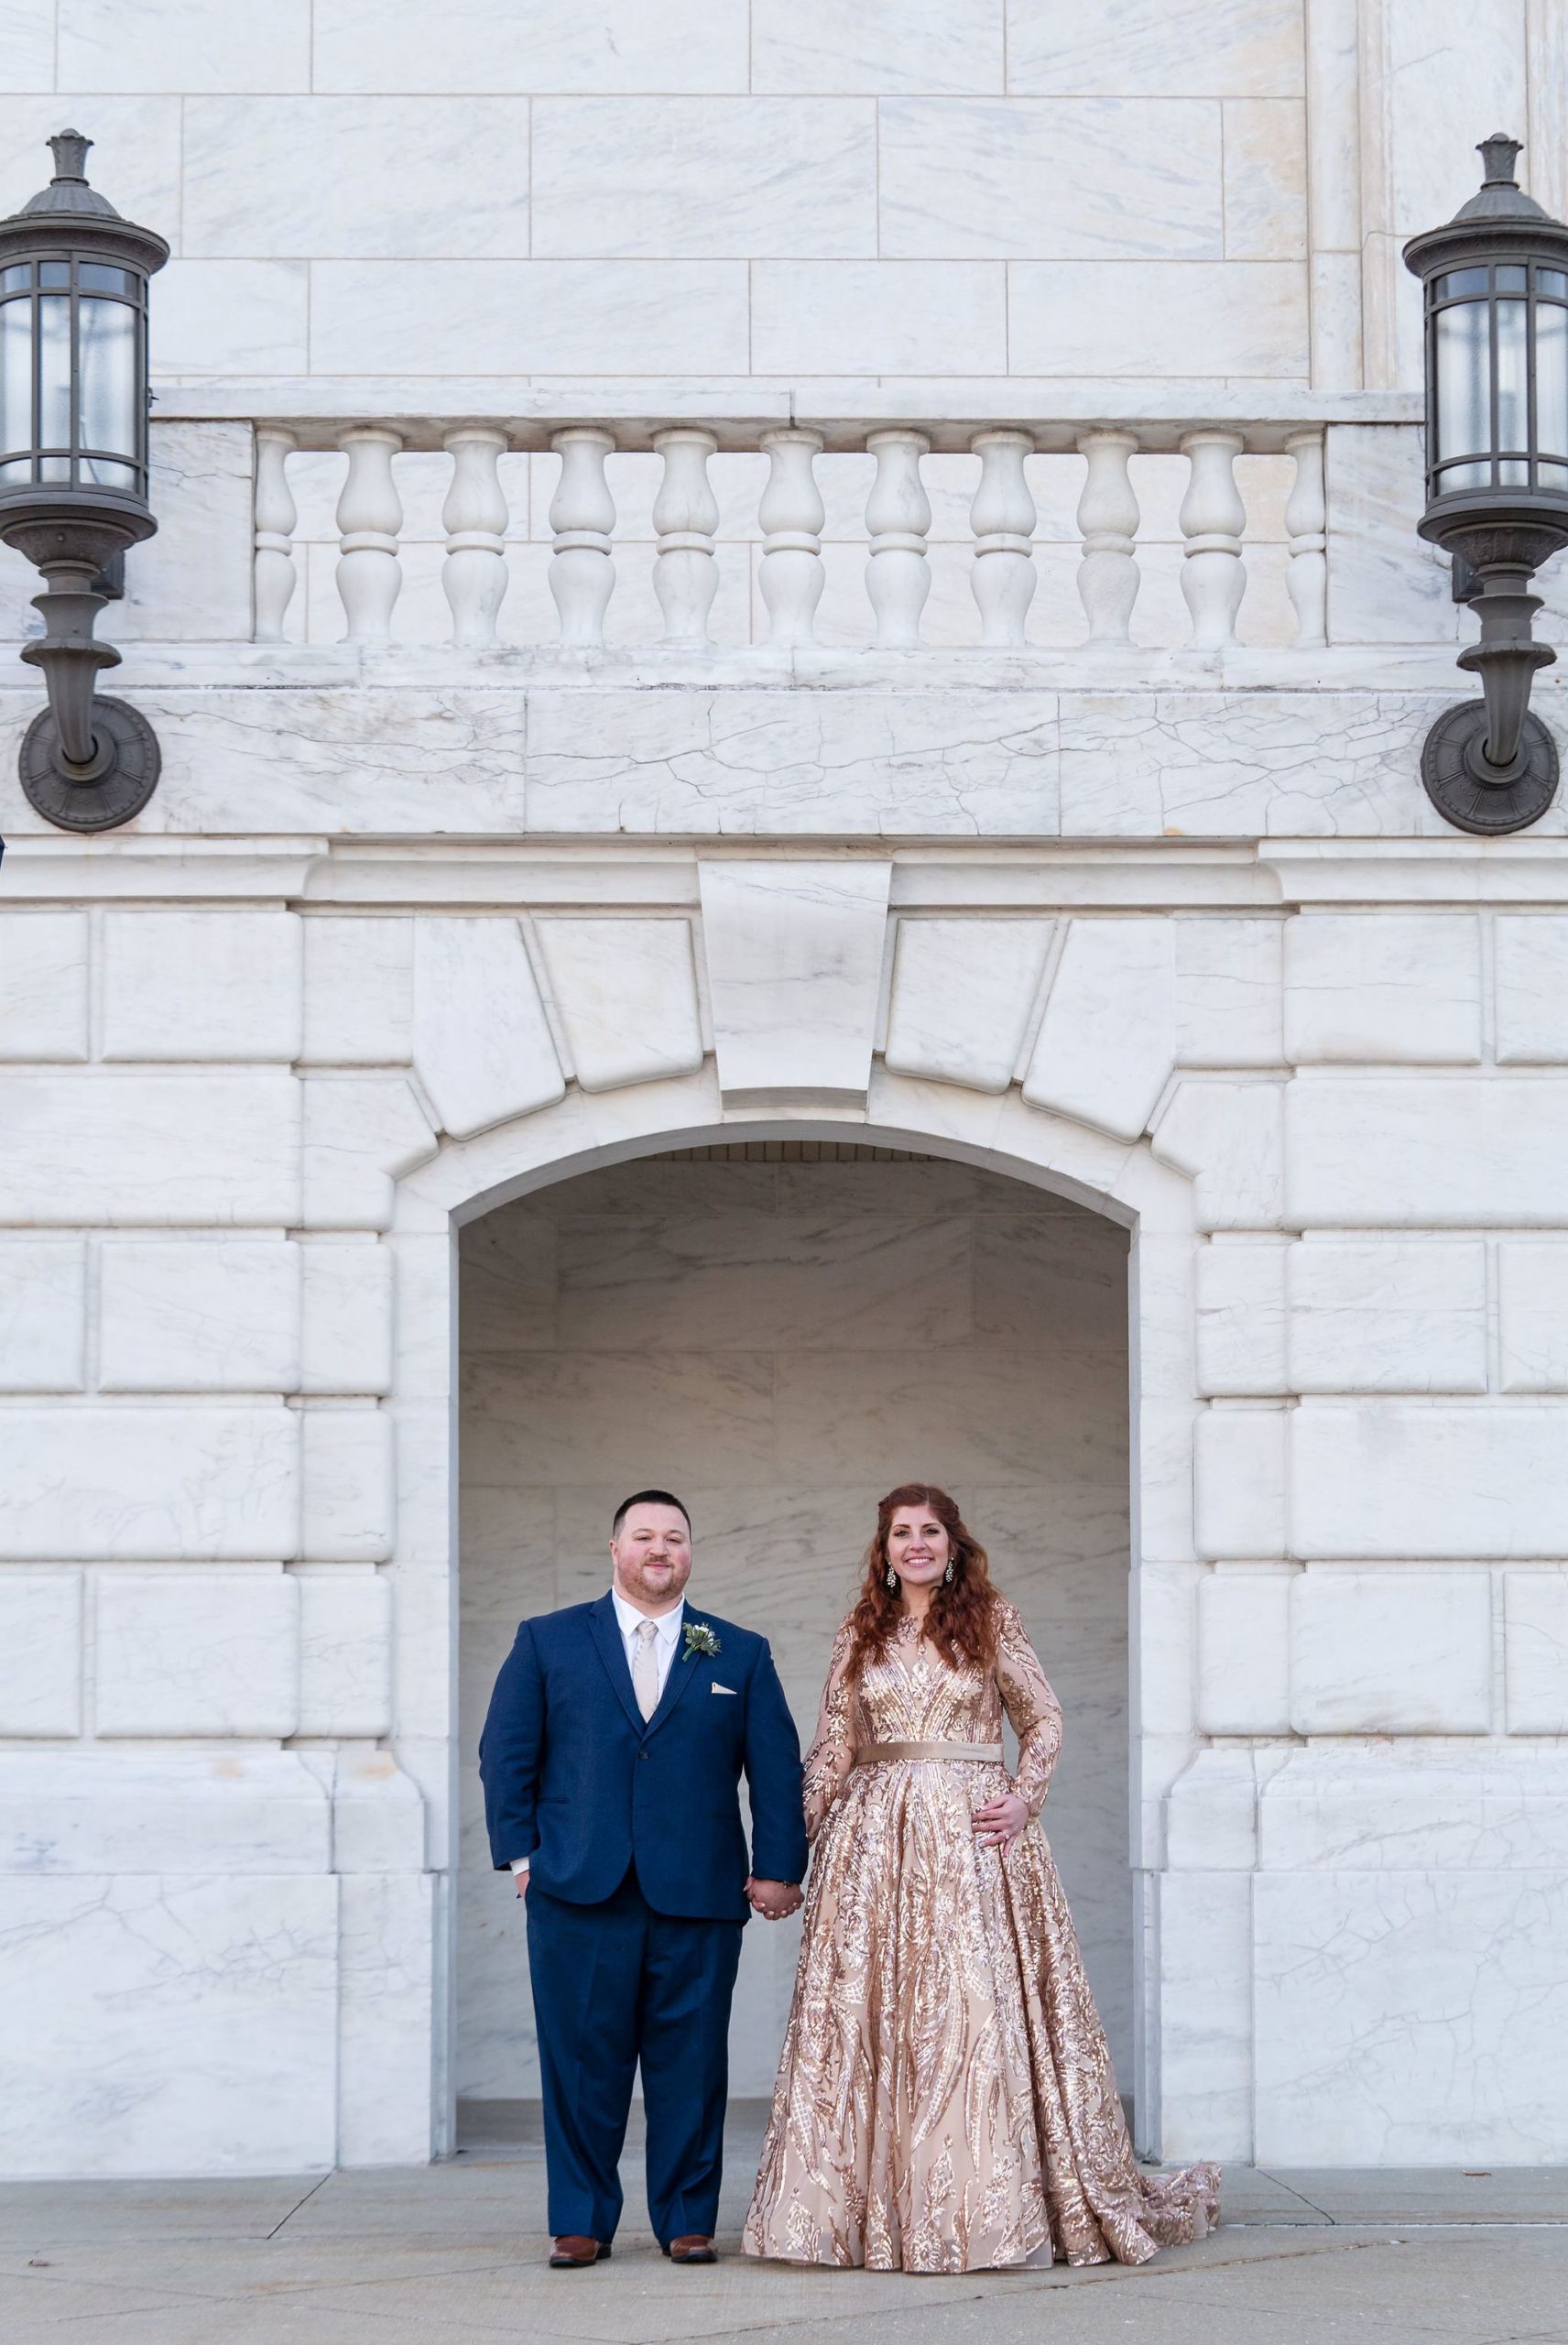 A couple poses in an archway at the Detroit Institute of Art.  